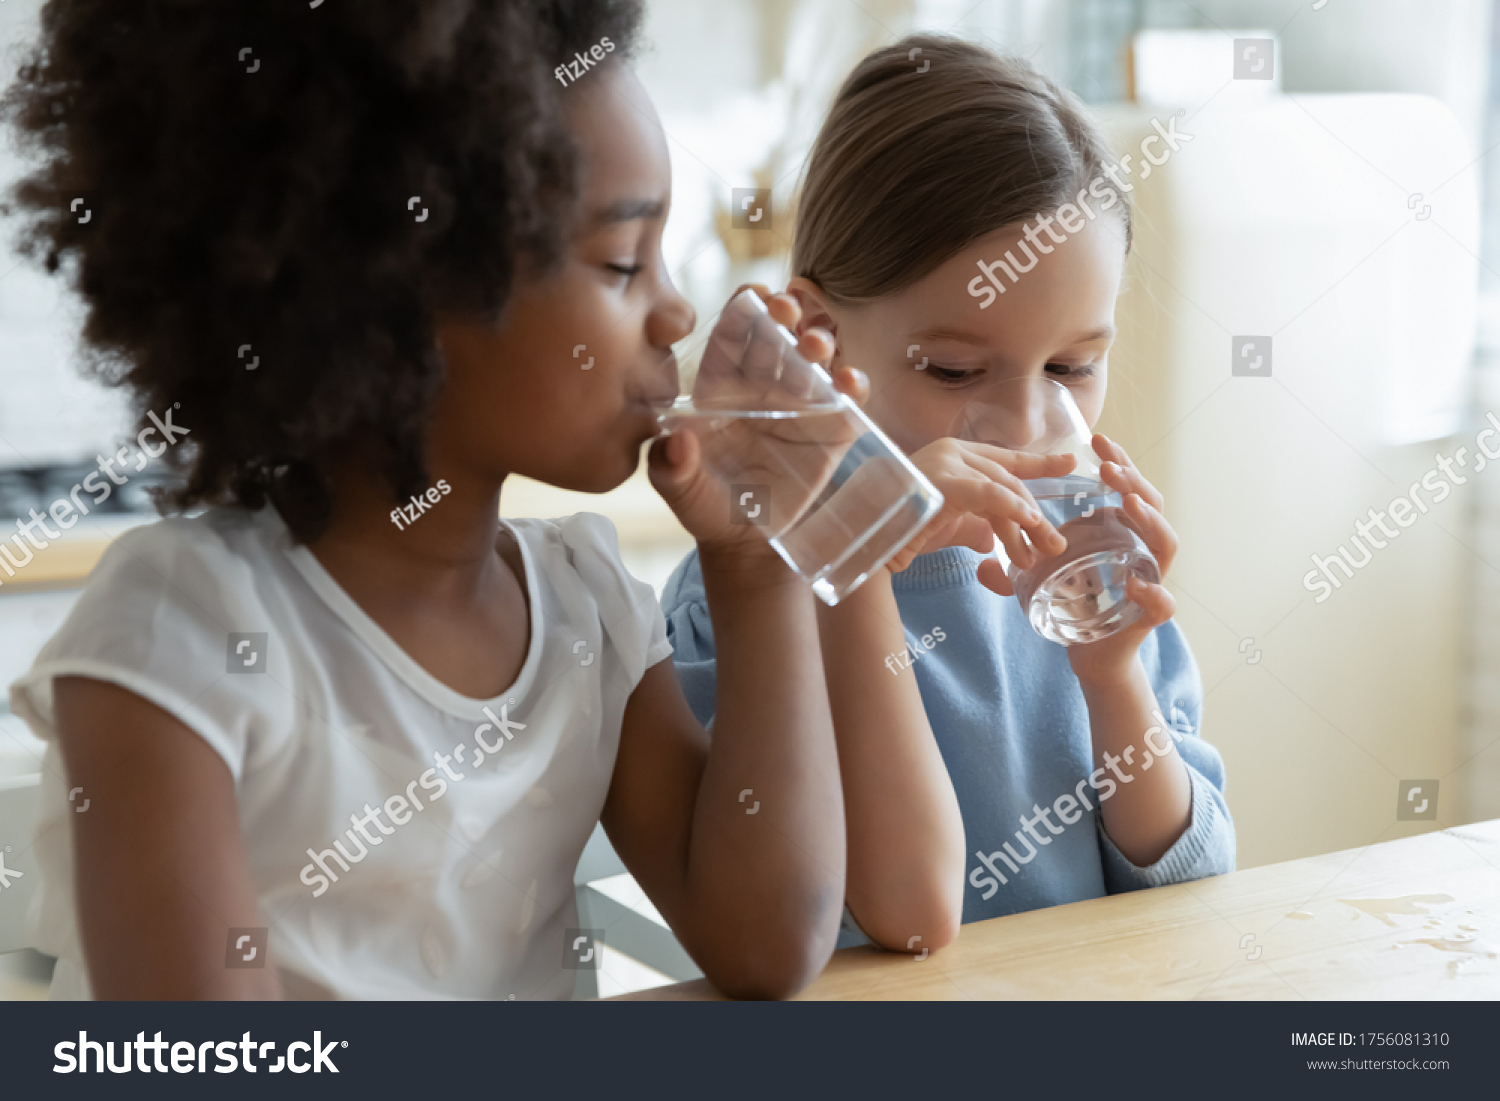 Two multi racial little girls sit at table in kitchen feels thirsty drink clean still natural or mineral water close up image. Healthy life habit of kids, health benefit dehydration prevention concept #1756081310